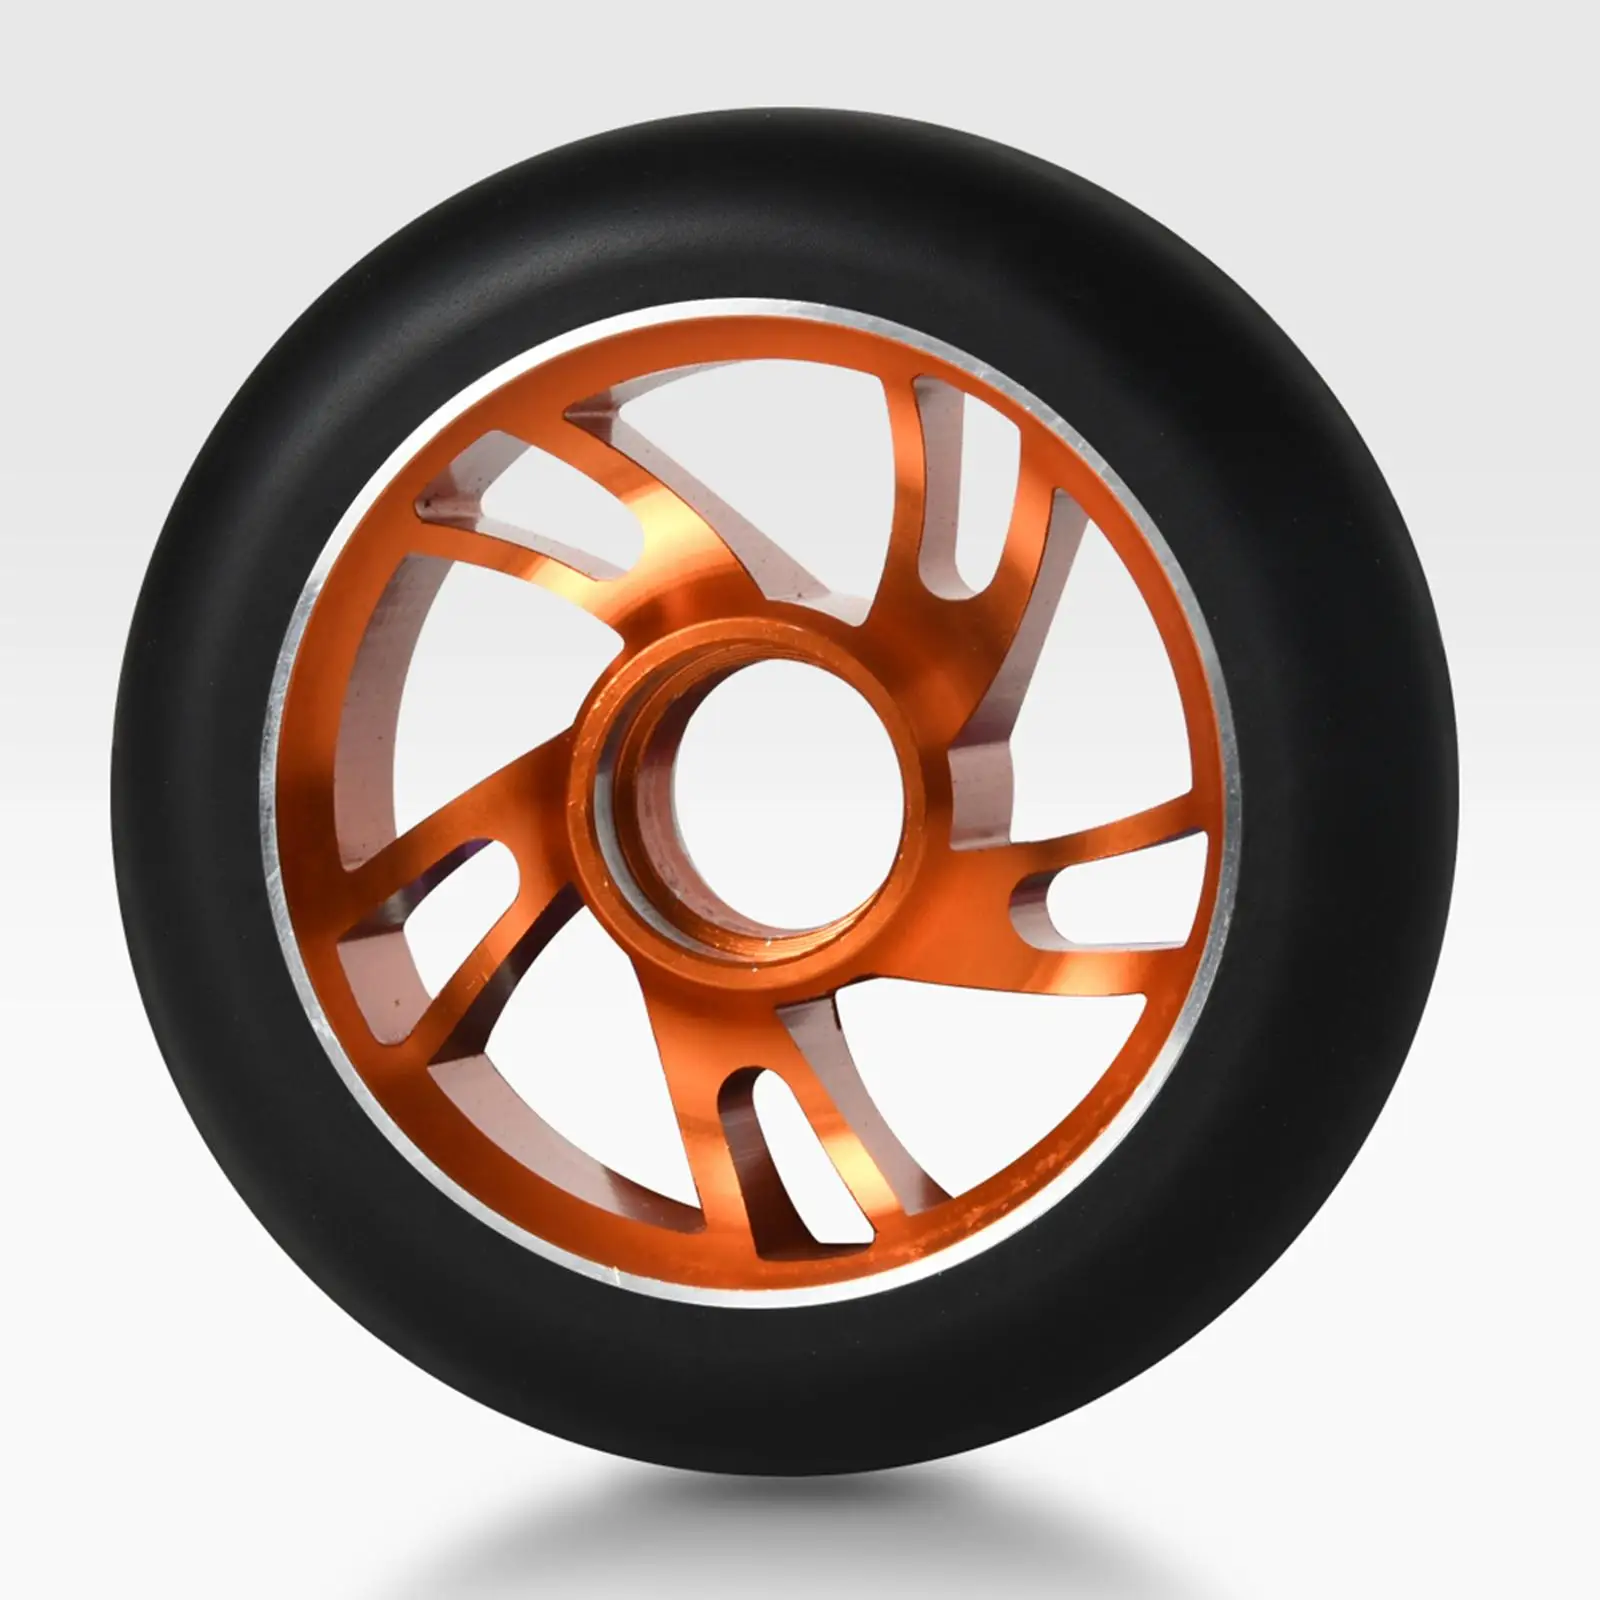 2x Scooter Replacement Wheels Wear Resistant Aluminium Alloy Professional 100mm for Smooth Ride for Scooter Accessories Modified